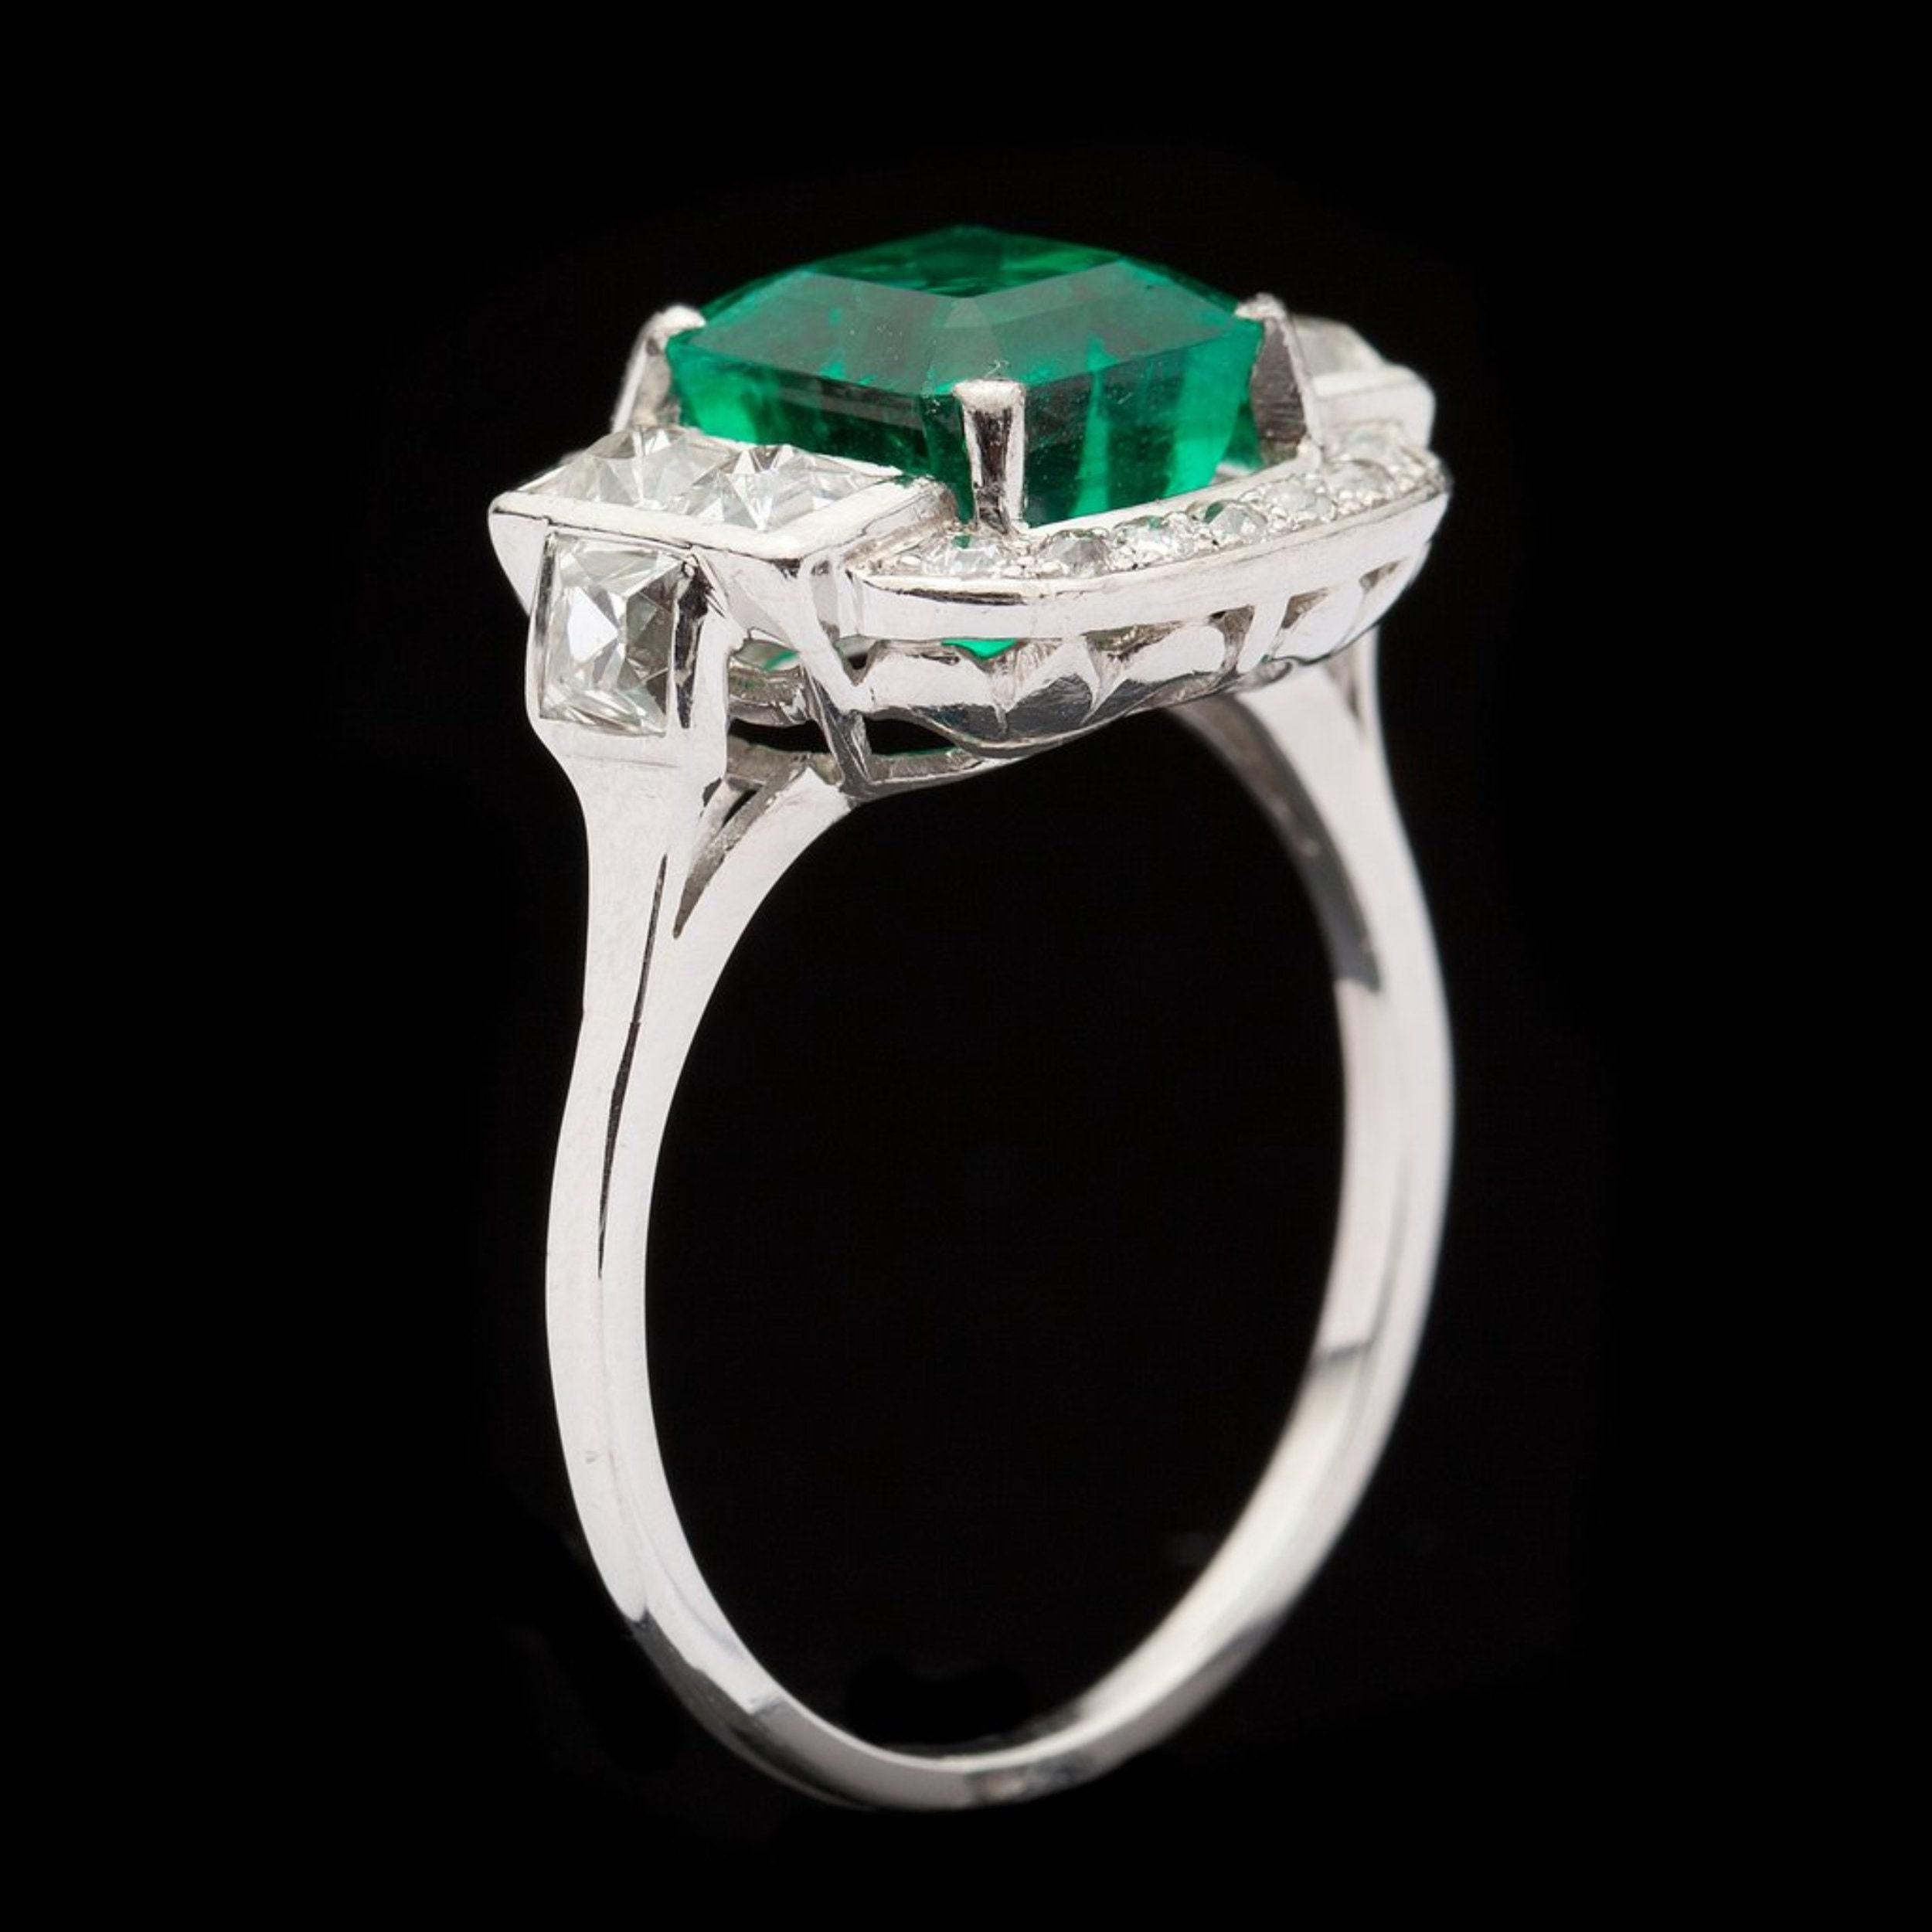 For Sale:  2 Carat Natural Colombian Emerald Engagement Ring White Gold Diamond Bridal Ring 3